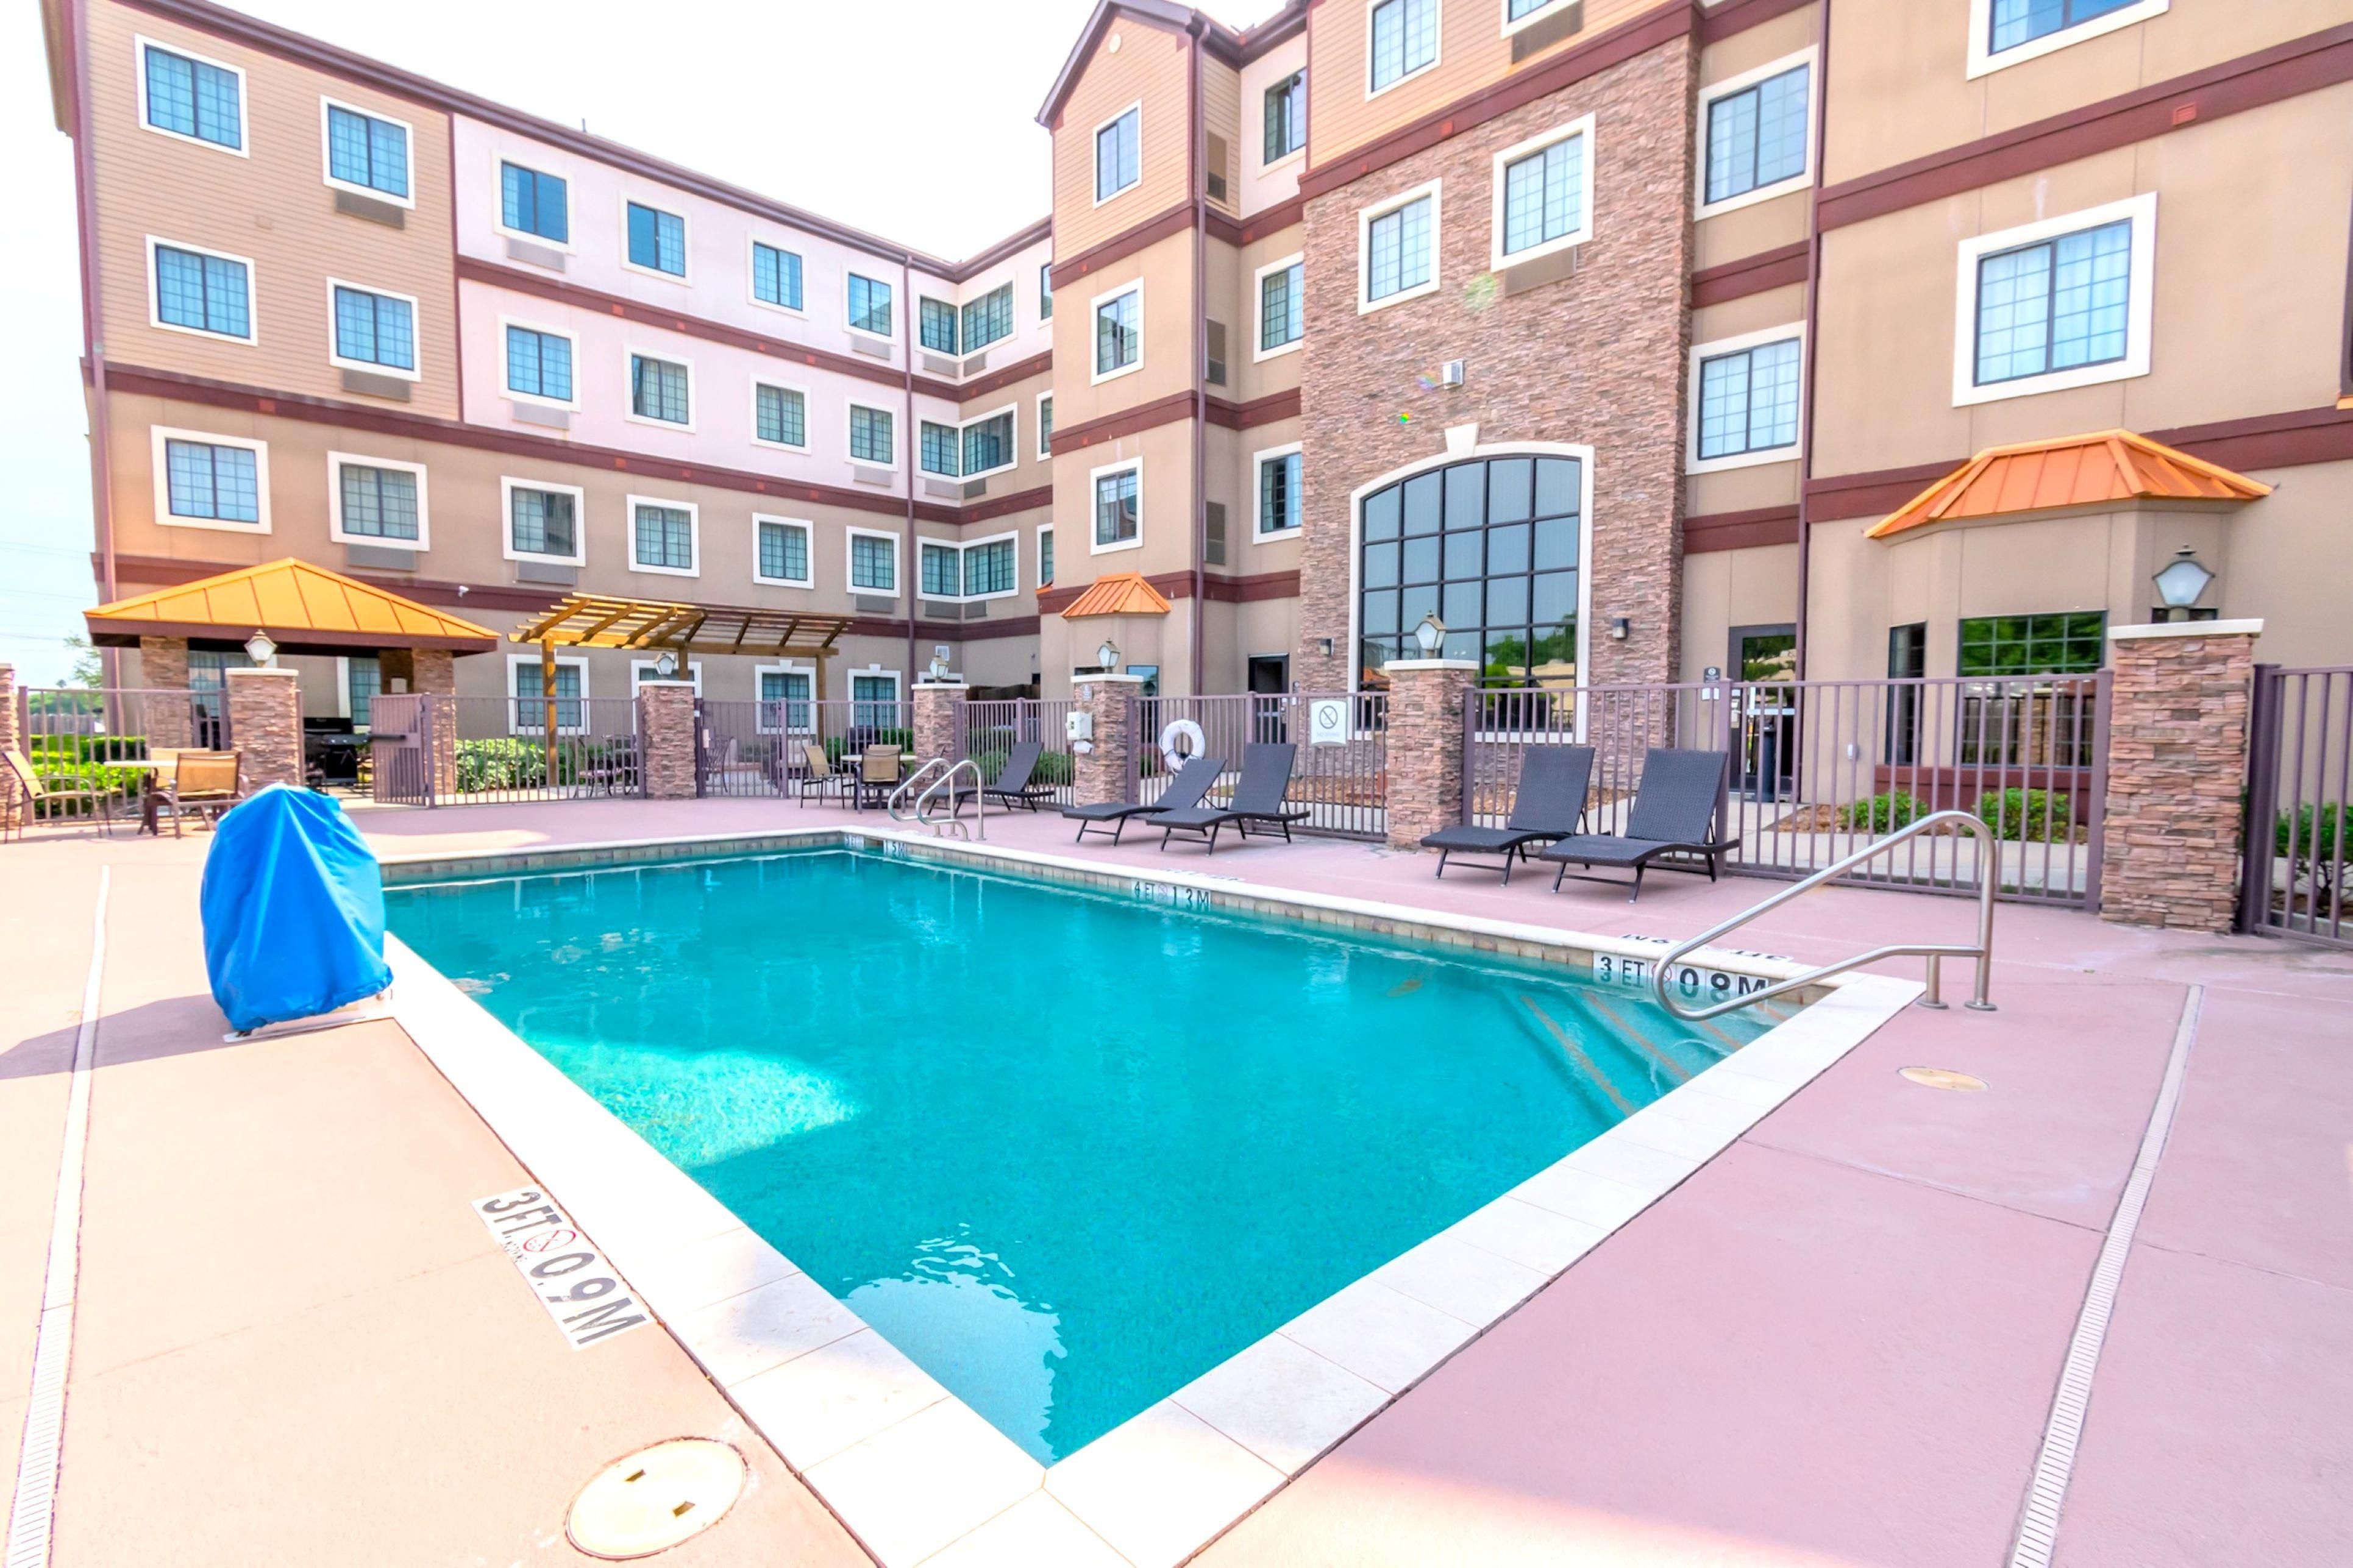 Enjoy the beautiful Texas weather in our outdoor pool! Open 11am to 10pm each day. 